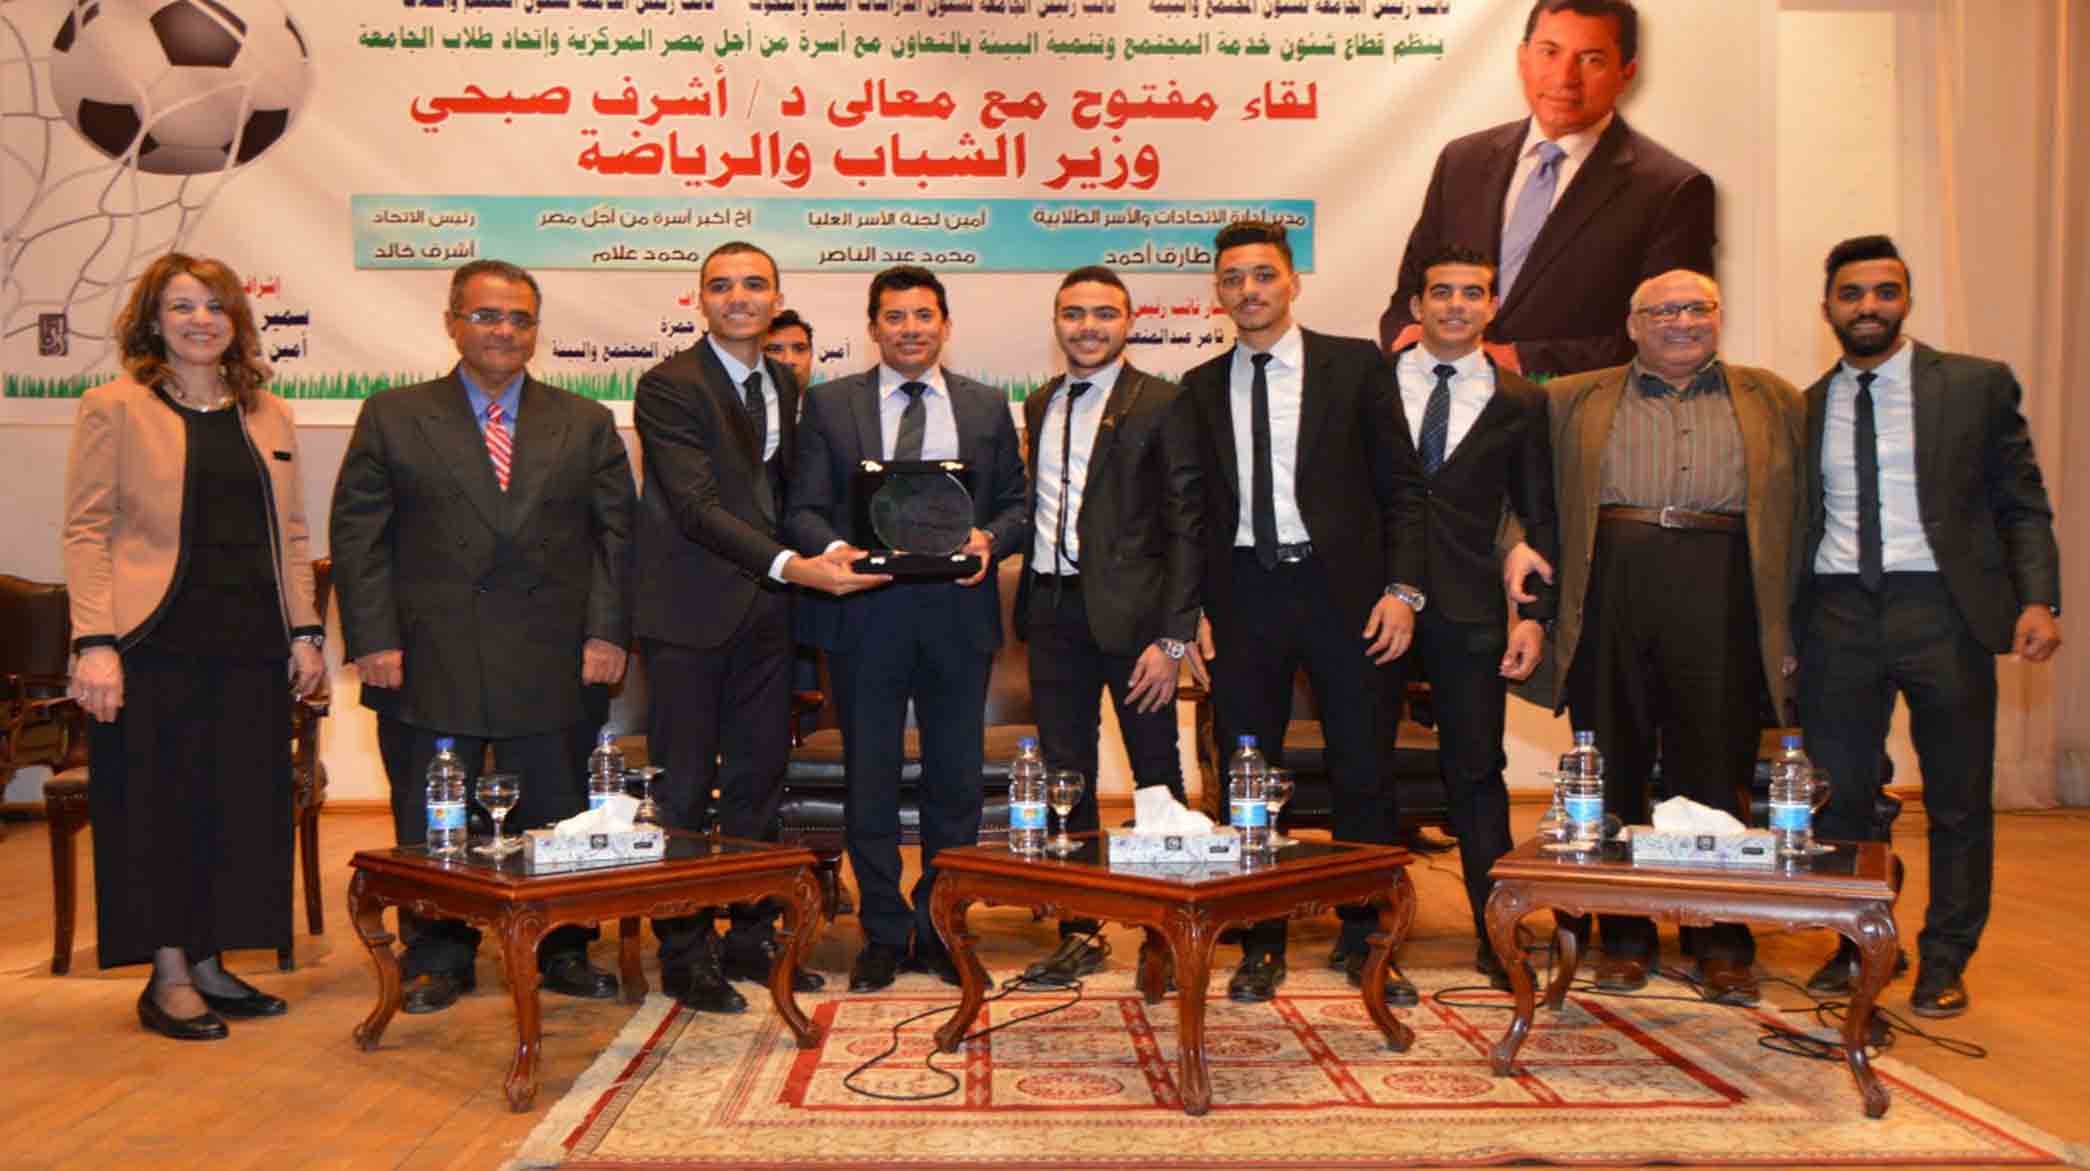 Minister of Youth and Sports meets students of Ain Shams University